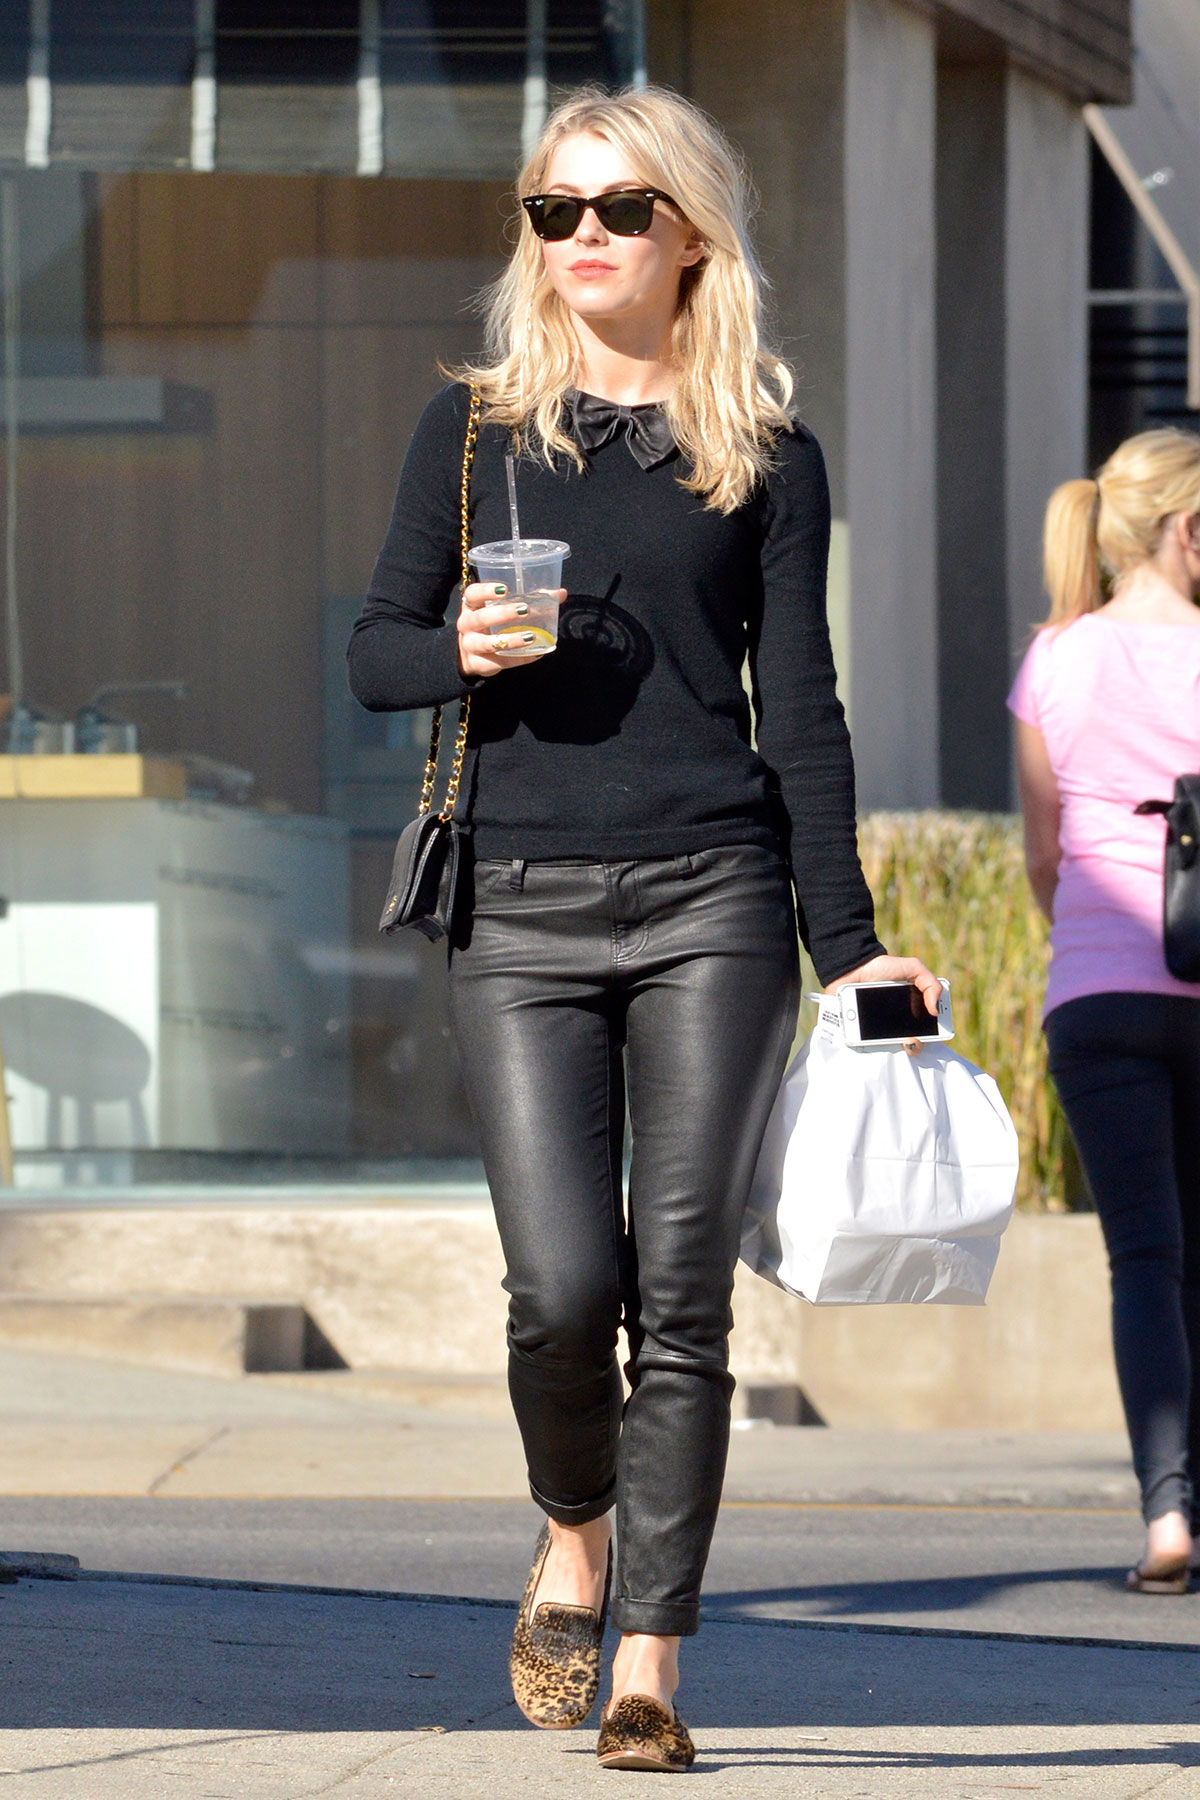 Julianne Hough at Curvee in Beverly Hills